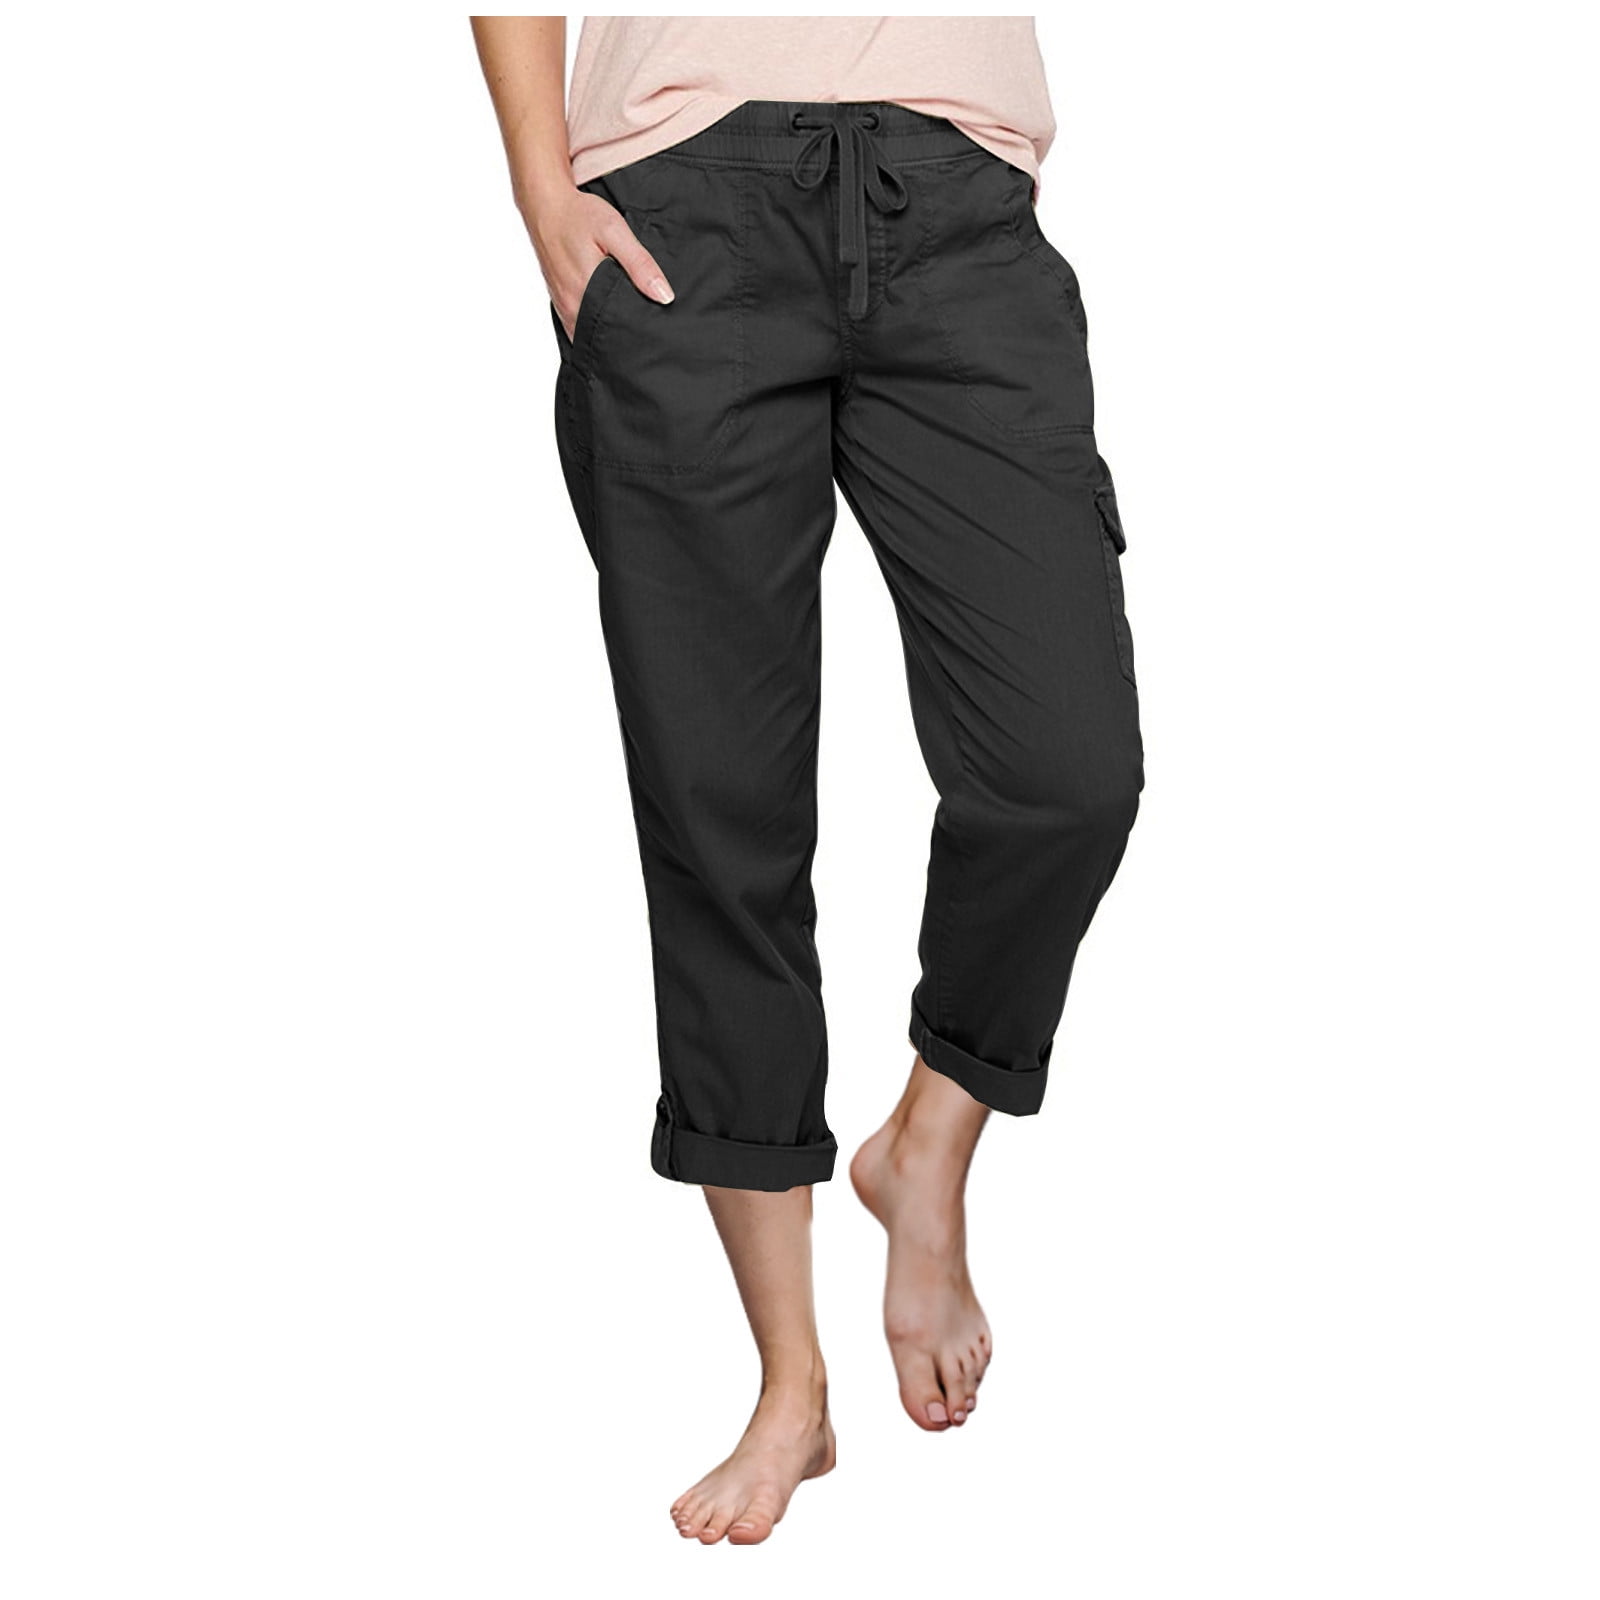 Women's Cargo Capris Hiking Pants Lightweight Quick Dry Elastic Waist  Outdoor Capris Summer Casual Loose Fit Capris with Pockets 